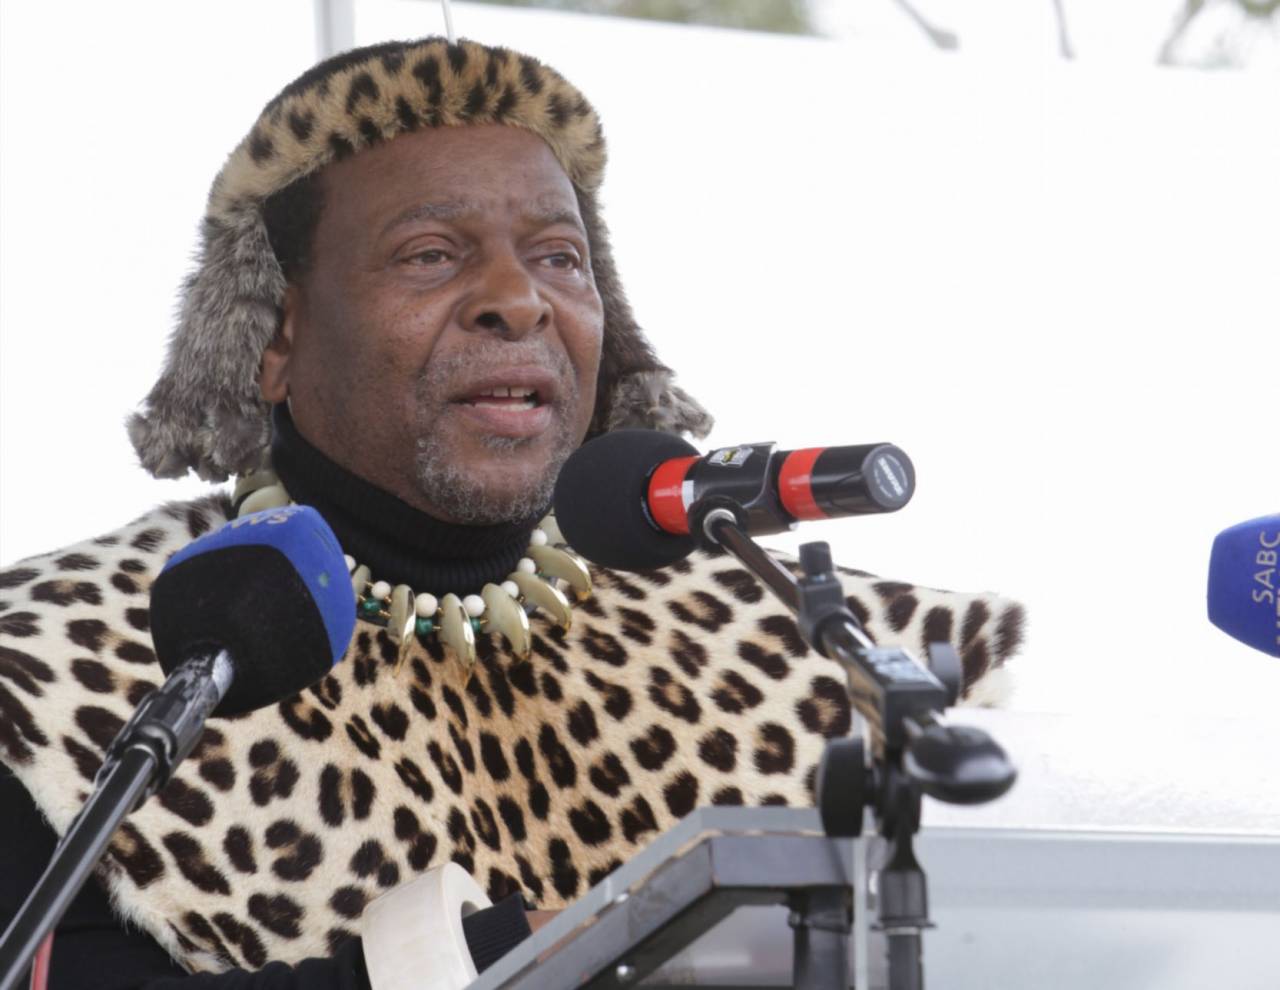 File: AmaZulu King Goodwill Zwelithini KaBhekuzulu wants an assurance that his nation’s land won’t be touched under land expropriation without compensation.